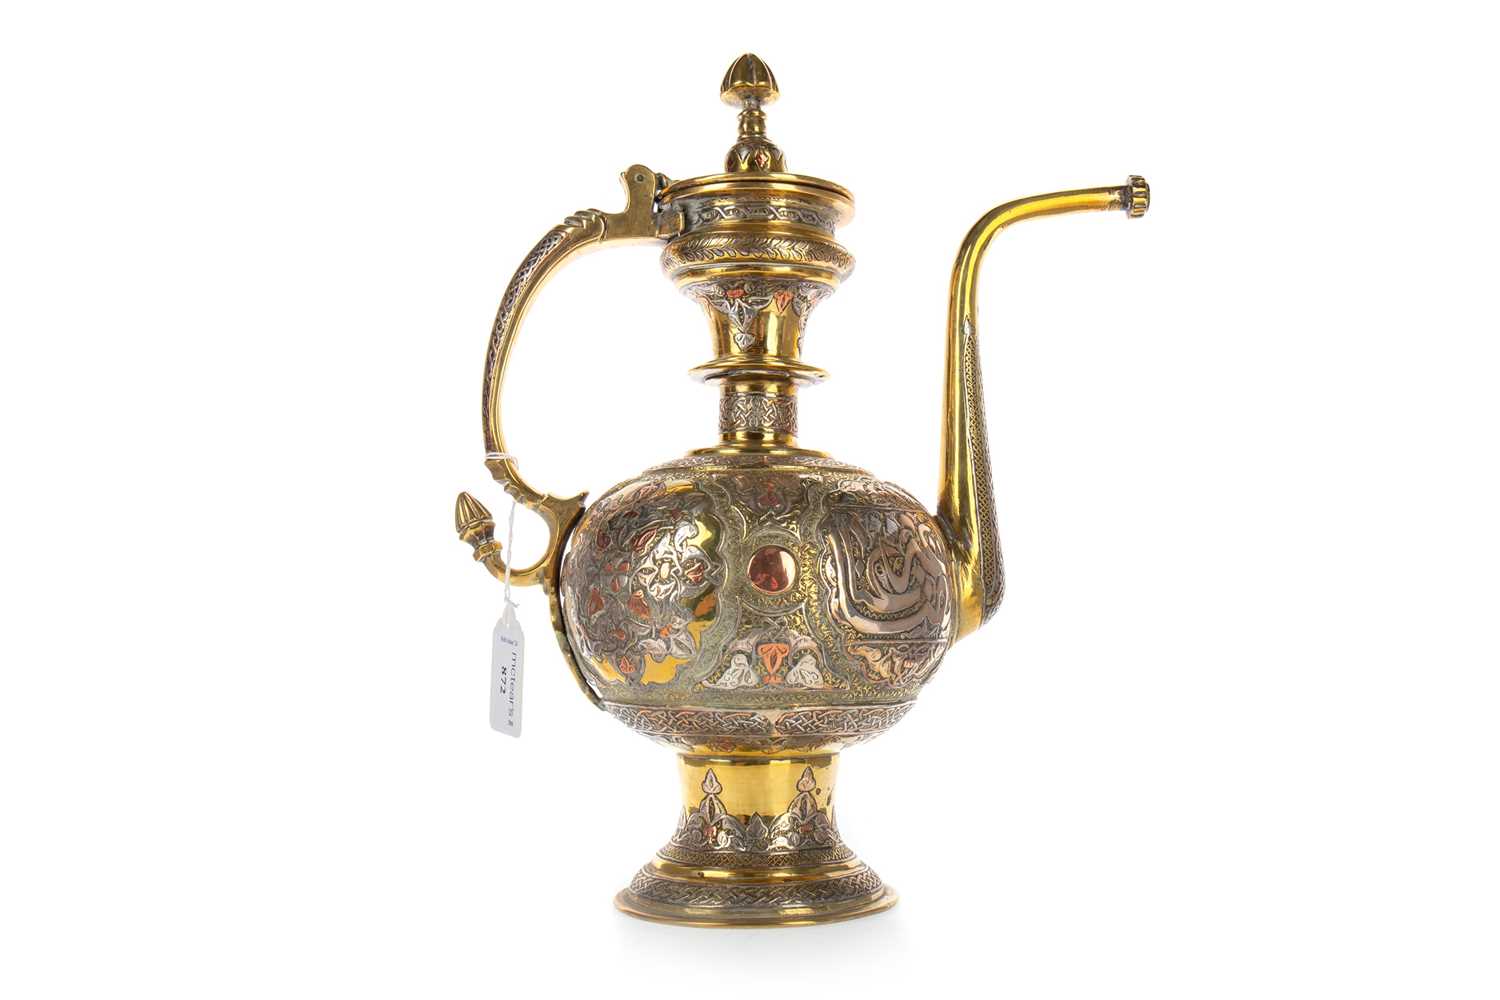 Lot 872 - INDO-PERSIAN BRASS AND MIXED METAL EWER